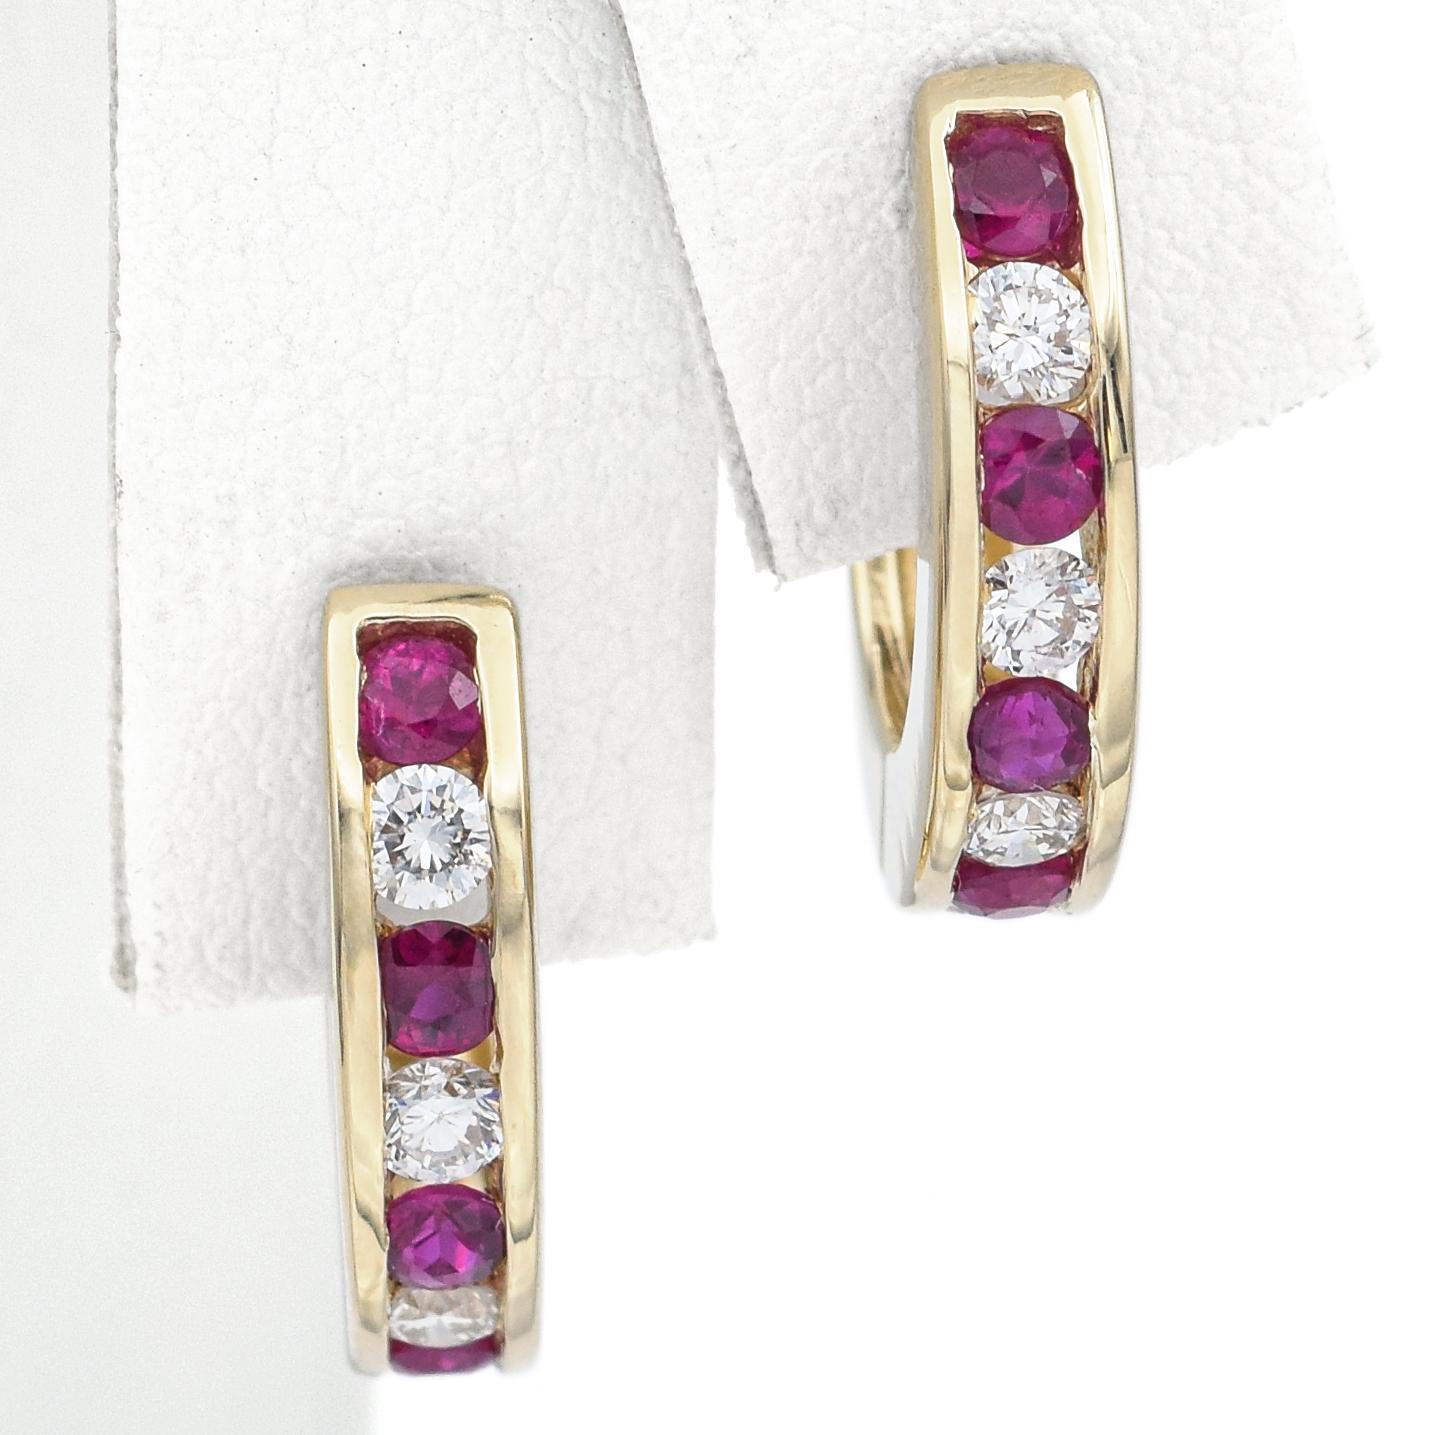 Estate 0.48 TCW Diamond & Ruby 14K Yellow Gold Hoop Earrings 17.0 x 16.5 mm In Good Condition For Sale In New York, NY